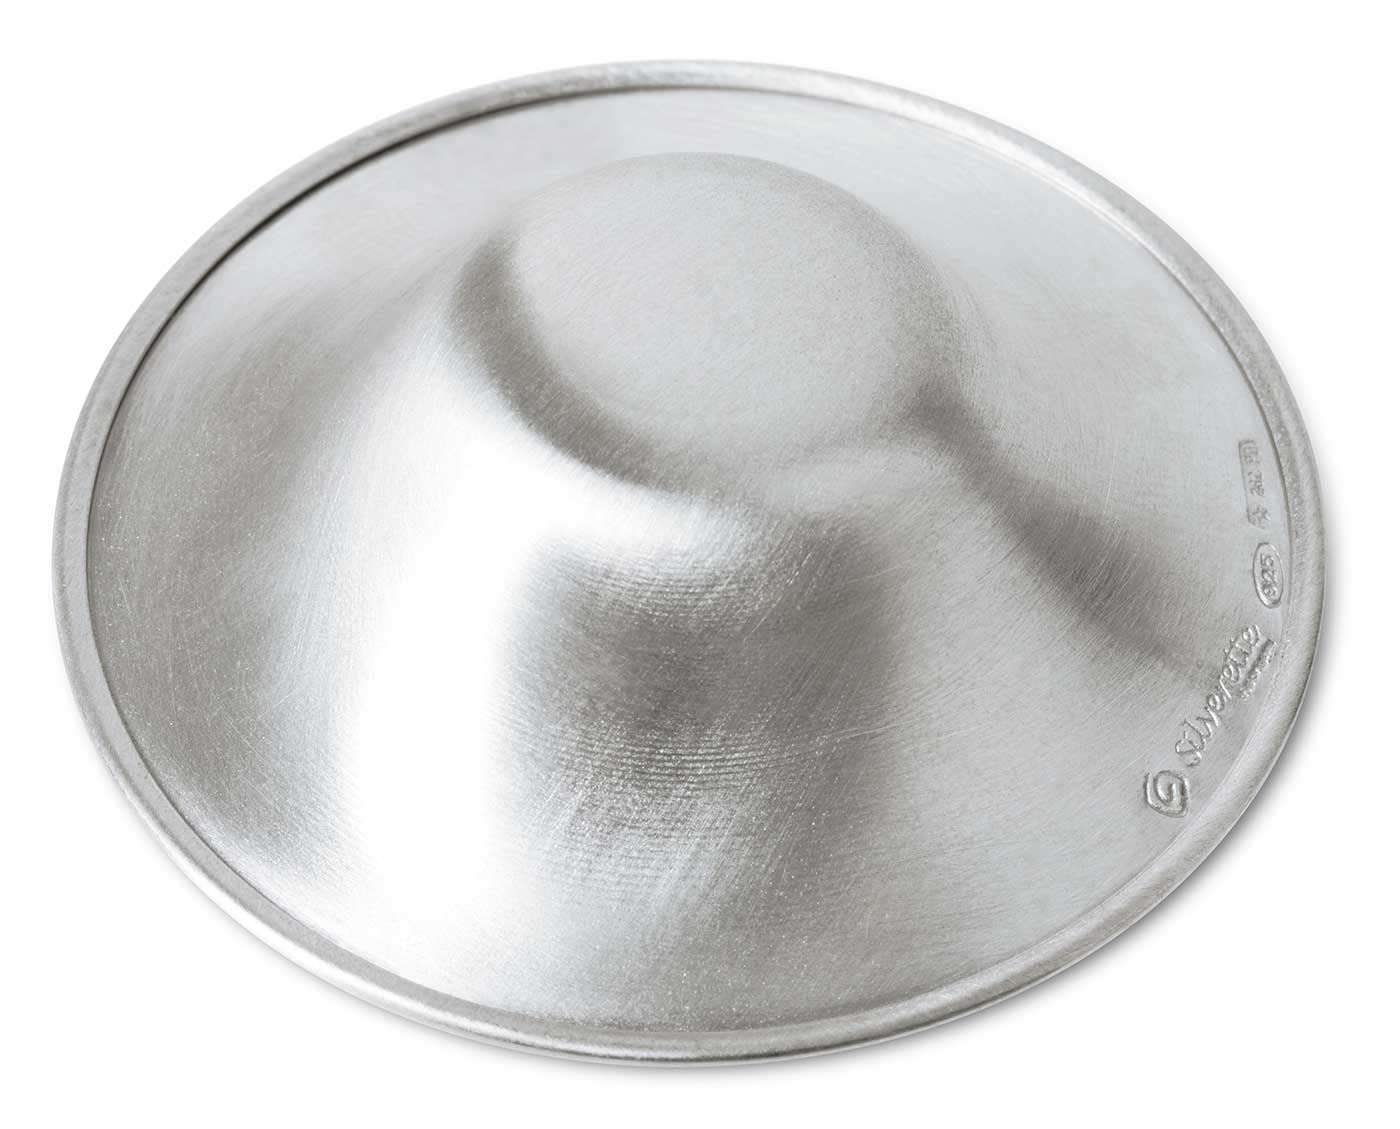 SILVERETTE XL The Original Silver Nursing Cups - Soothe and Protect Your Nursing Nipples